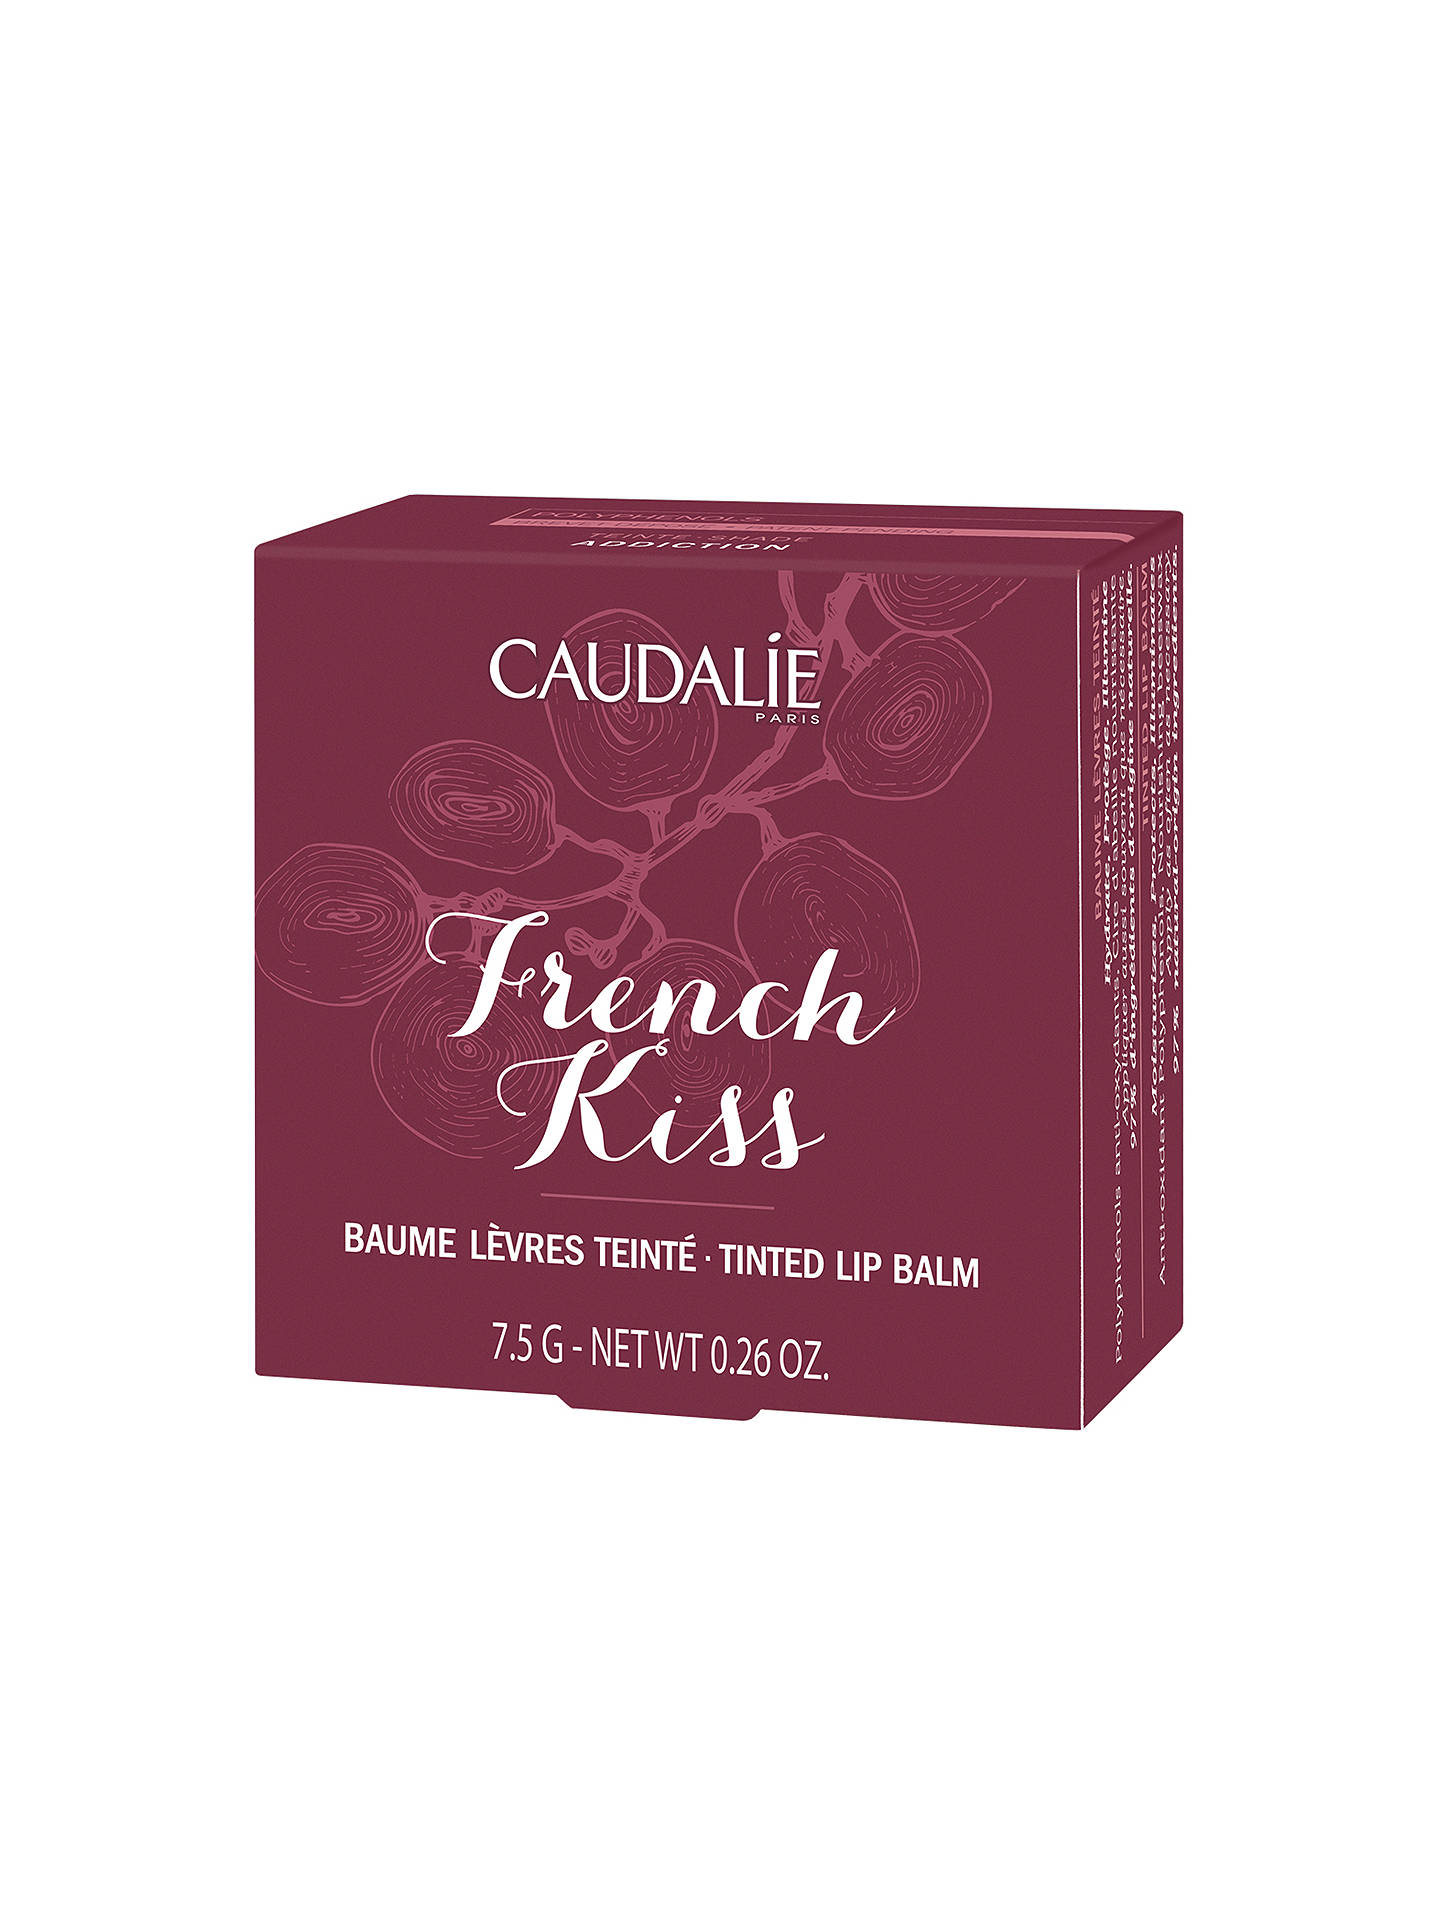 Buy Caudalie French Kiss Tinted Lip Balm, Addiction Online at johnlewis.com